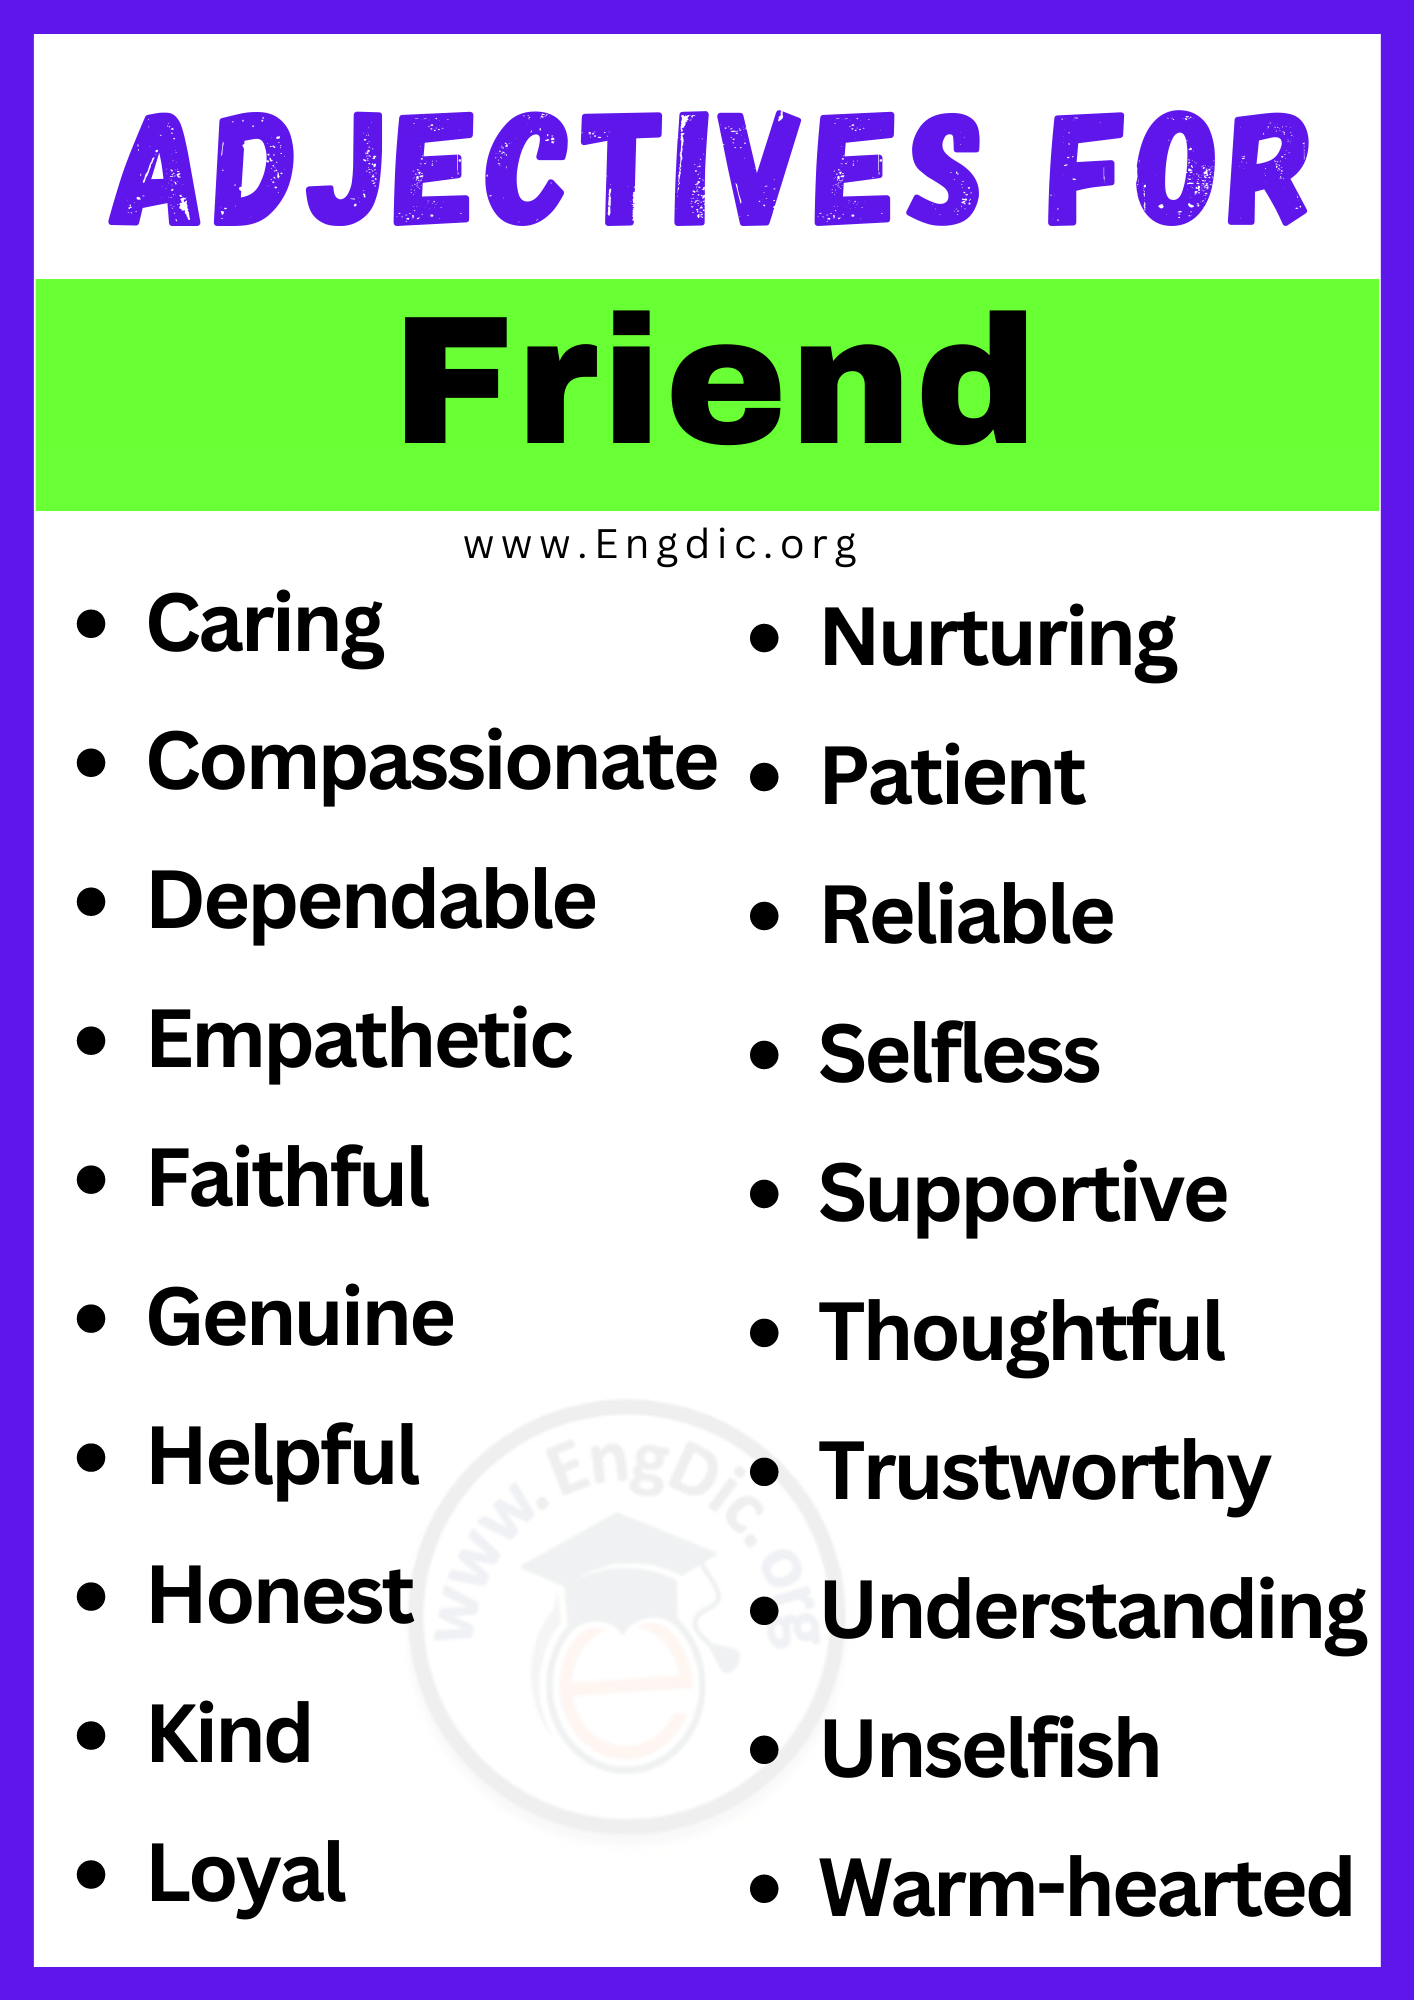 Adjectives for Friend